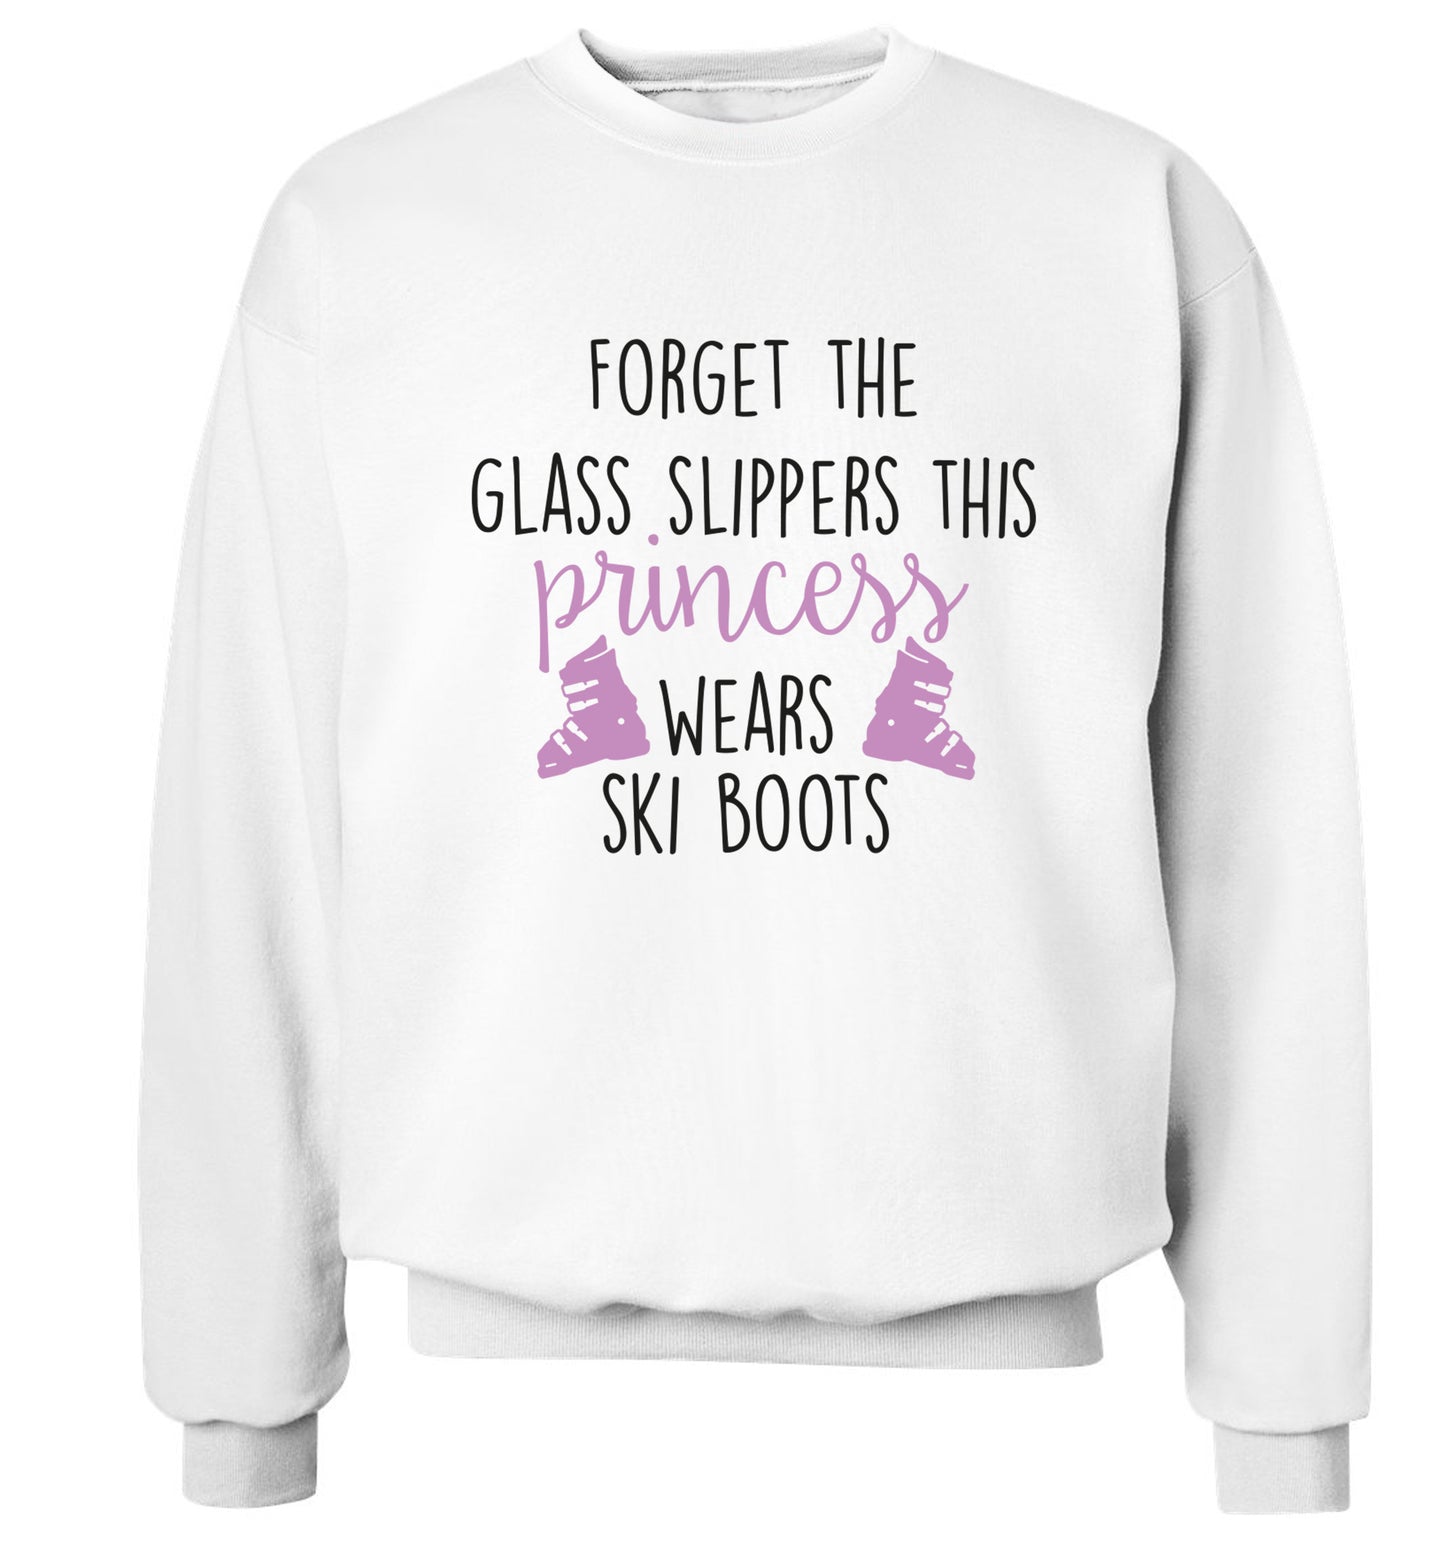 Forget the glass slippers this princess wears ski boots Adult's unisex white Sweater 2XL